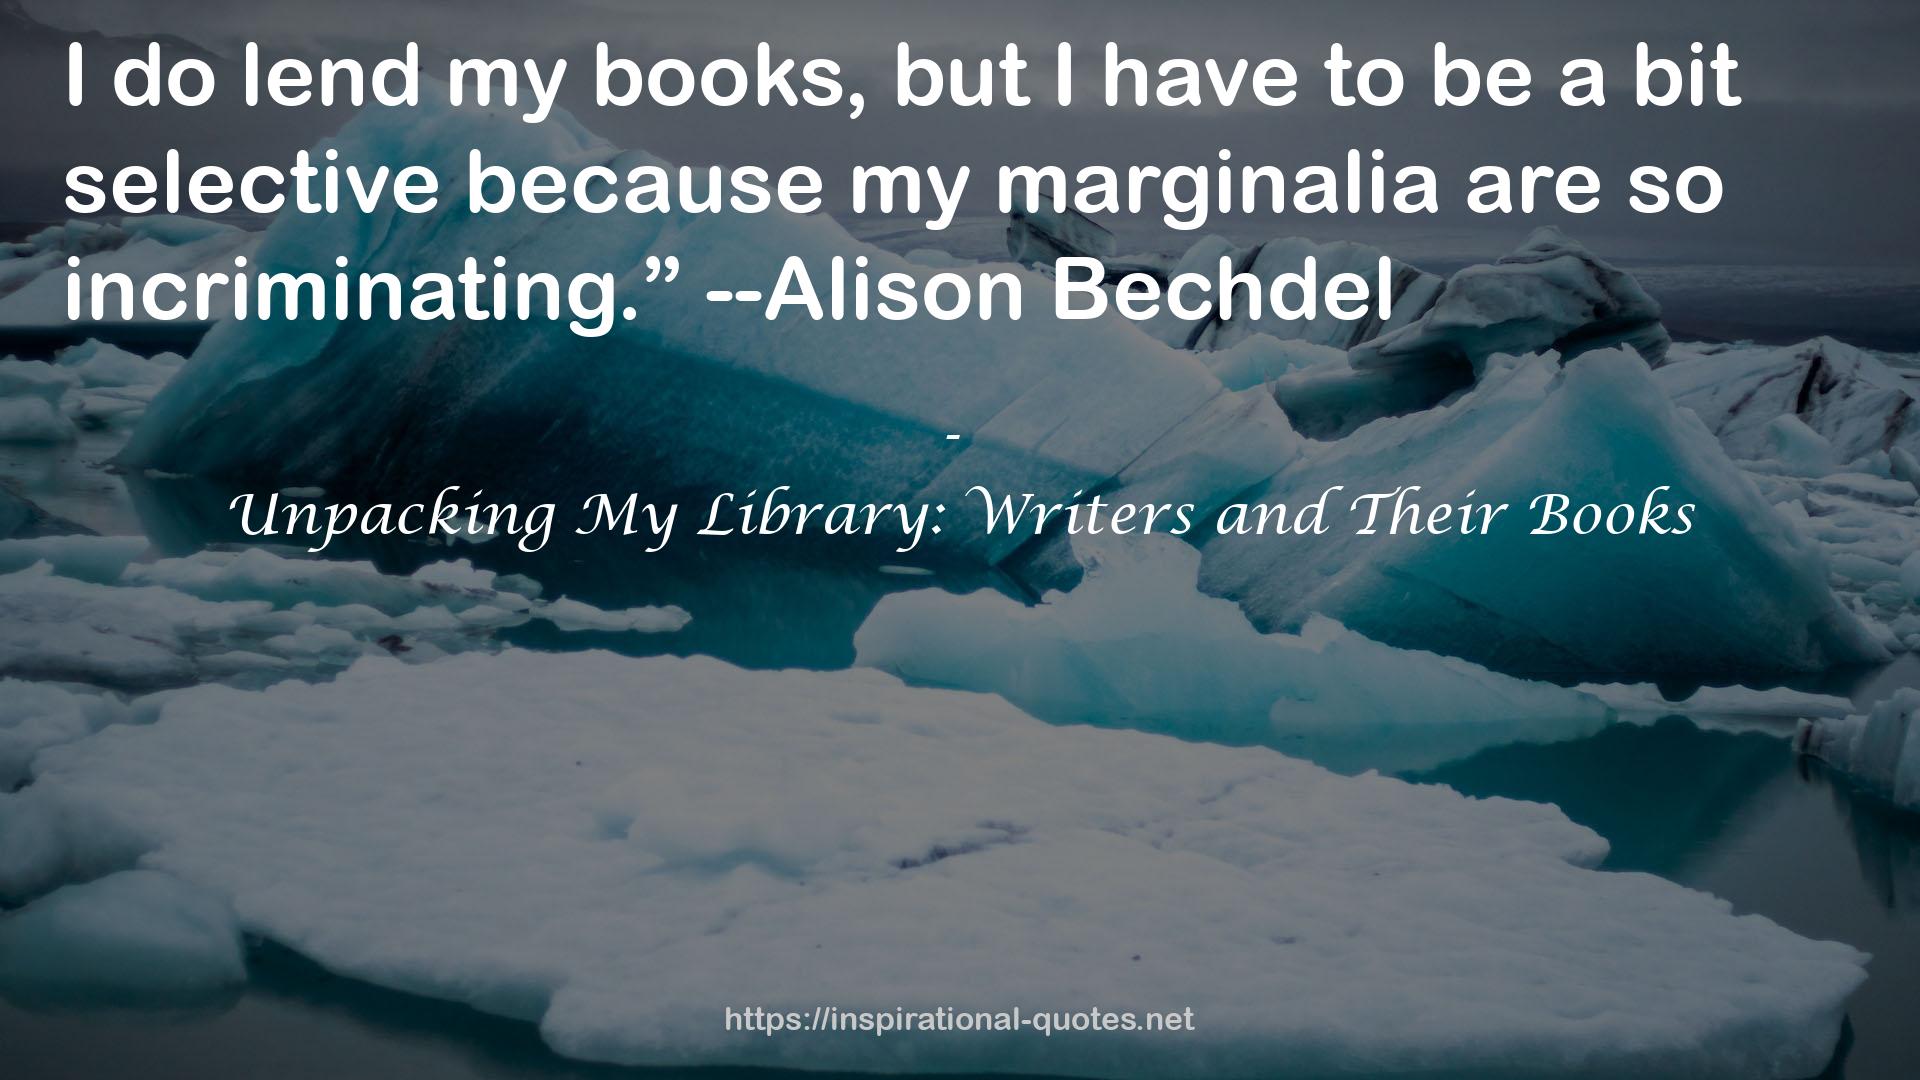 Unpacking My Library: Writers and Their Books QUOTES